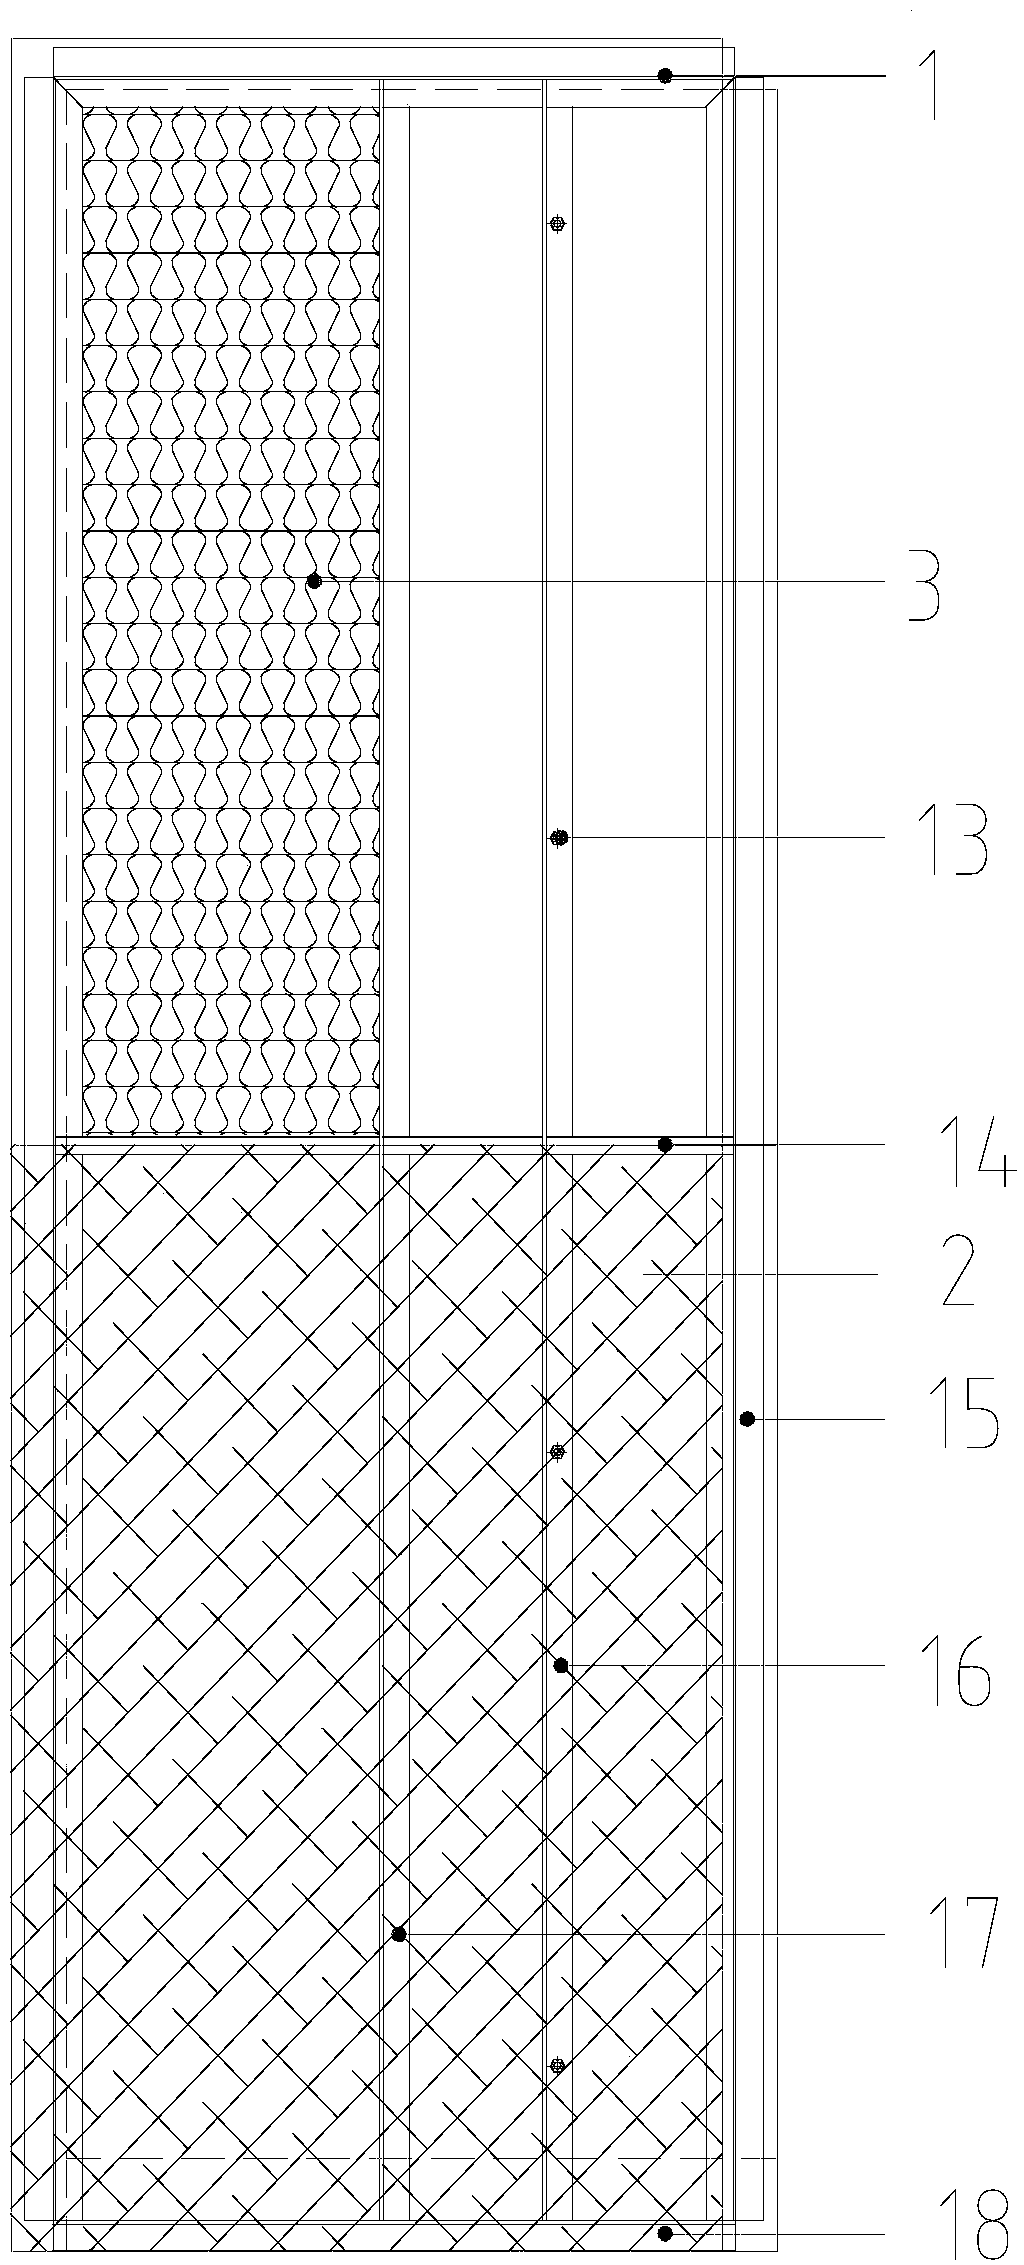 Light partition wall